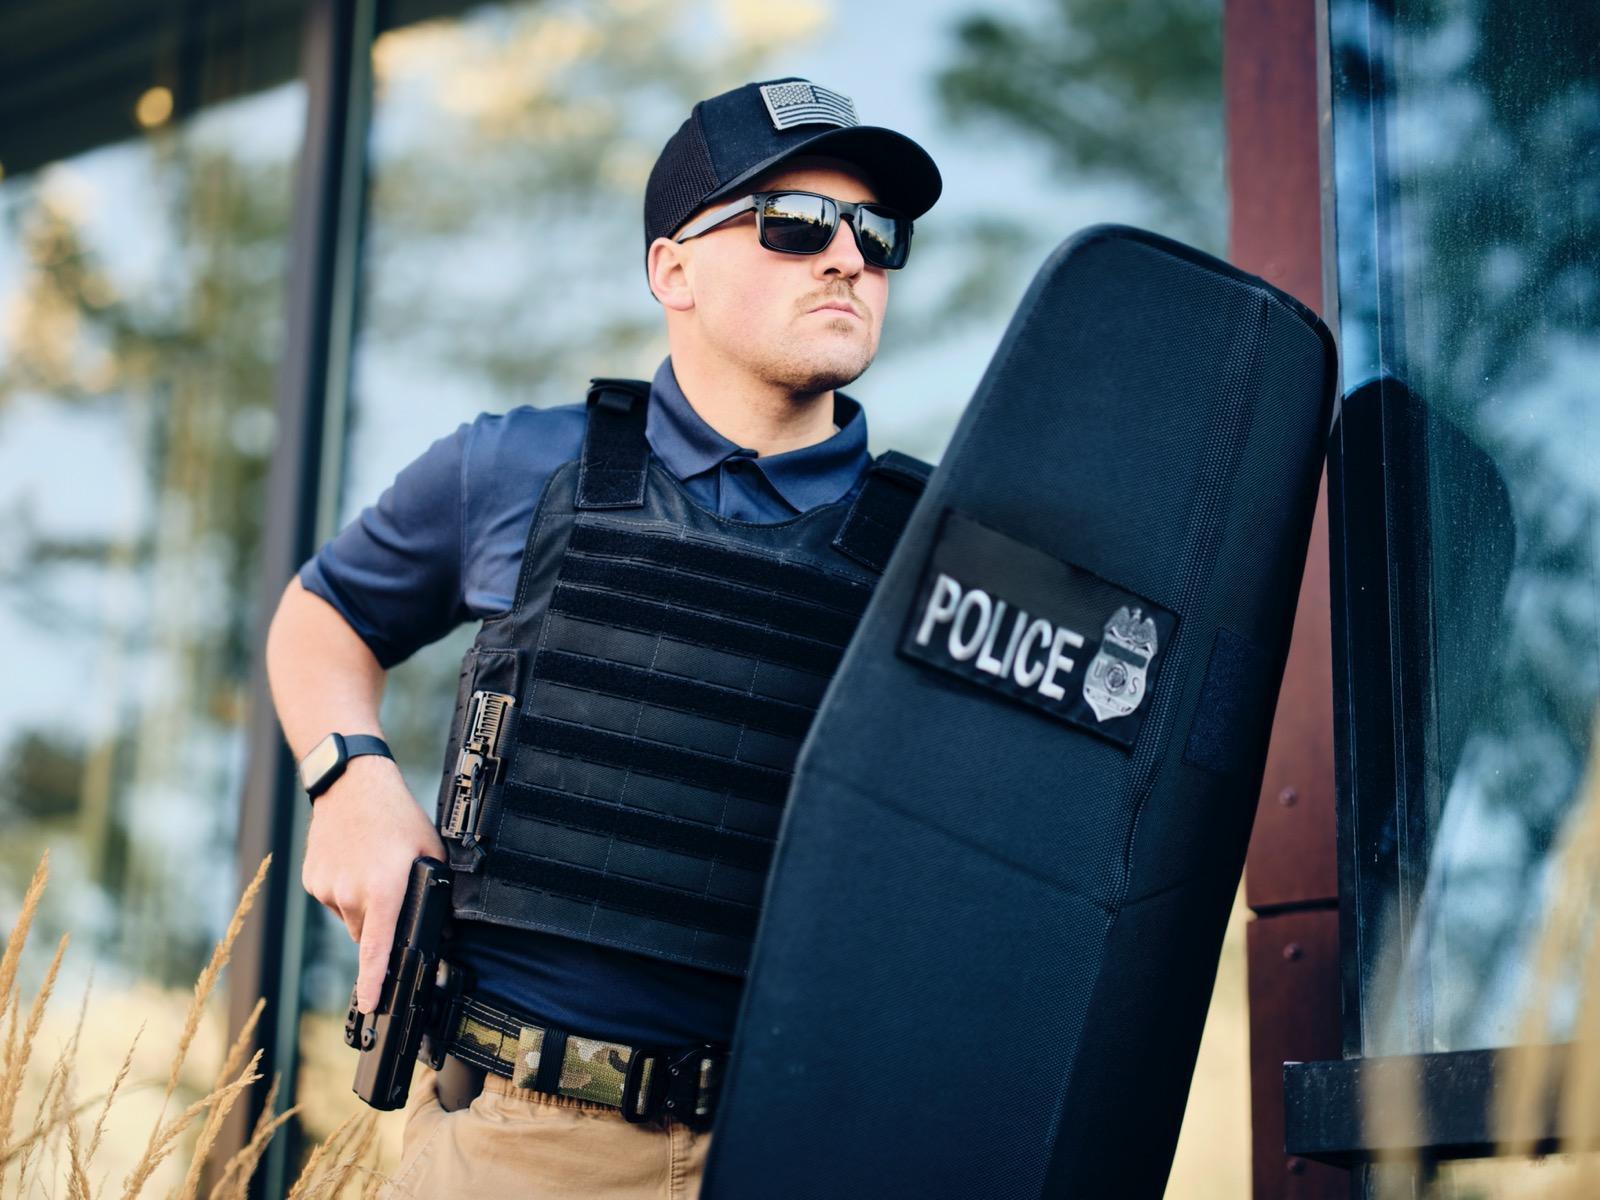 Origami inspired lightweight bulletproof shield developed to protect police  from gunfire